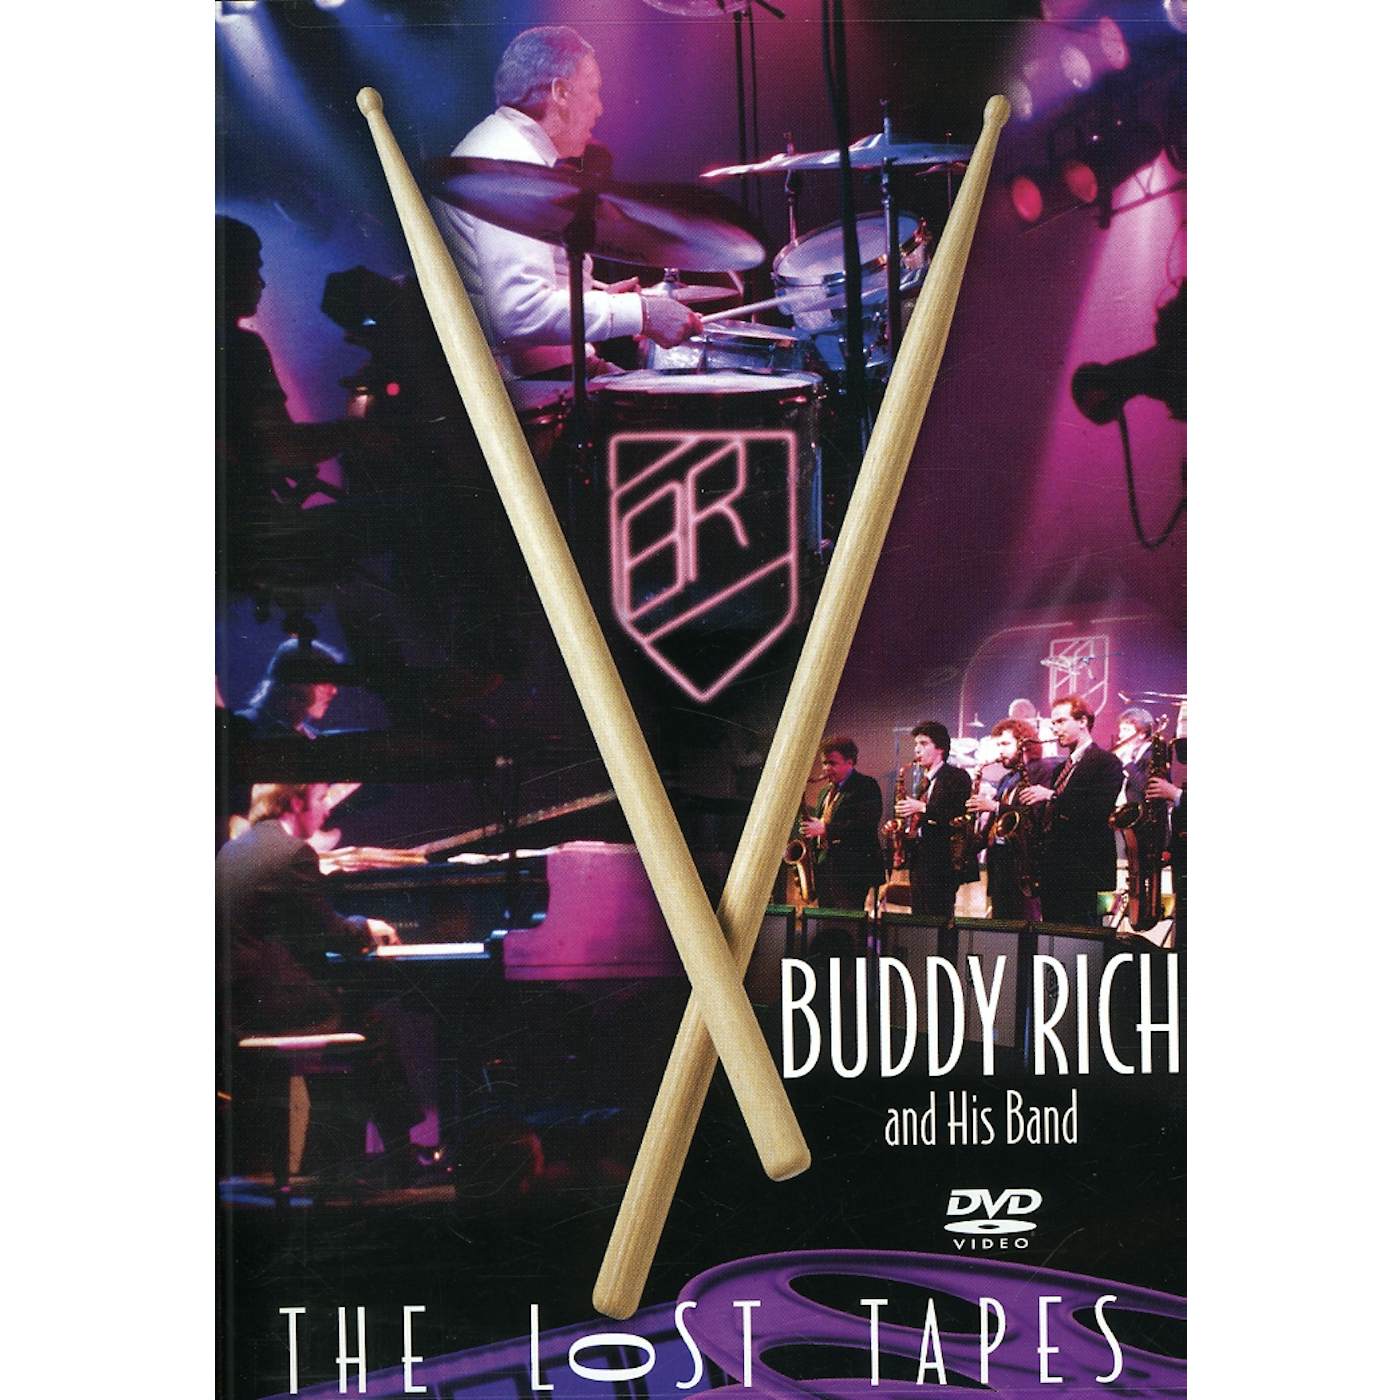 Buddy Rich LOST TAPES DVD